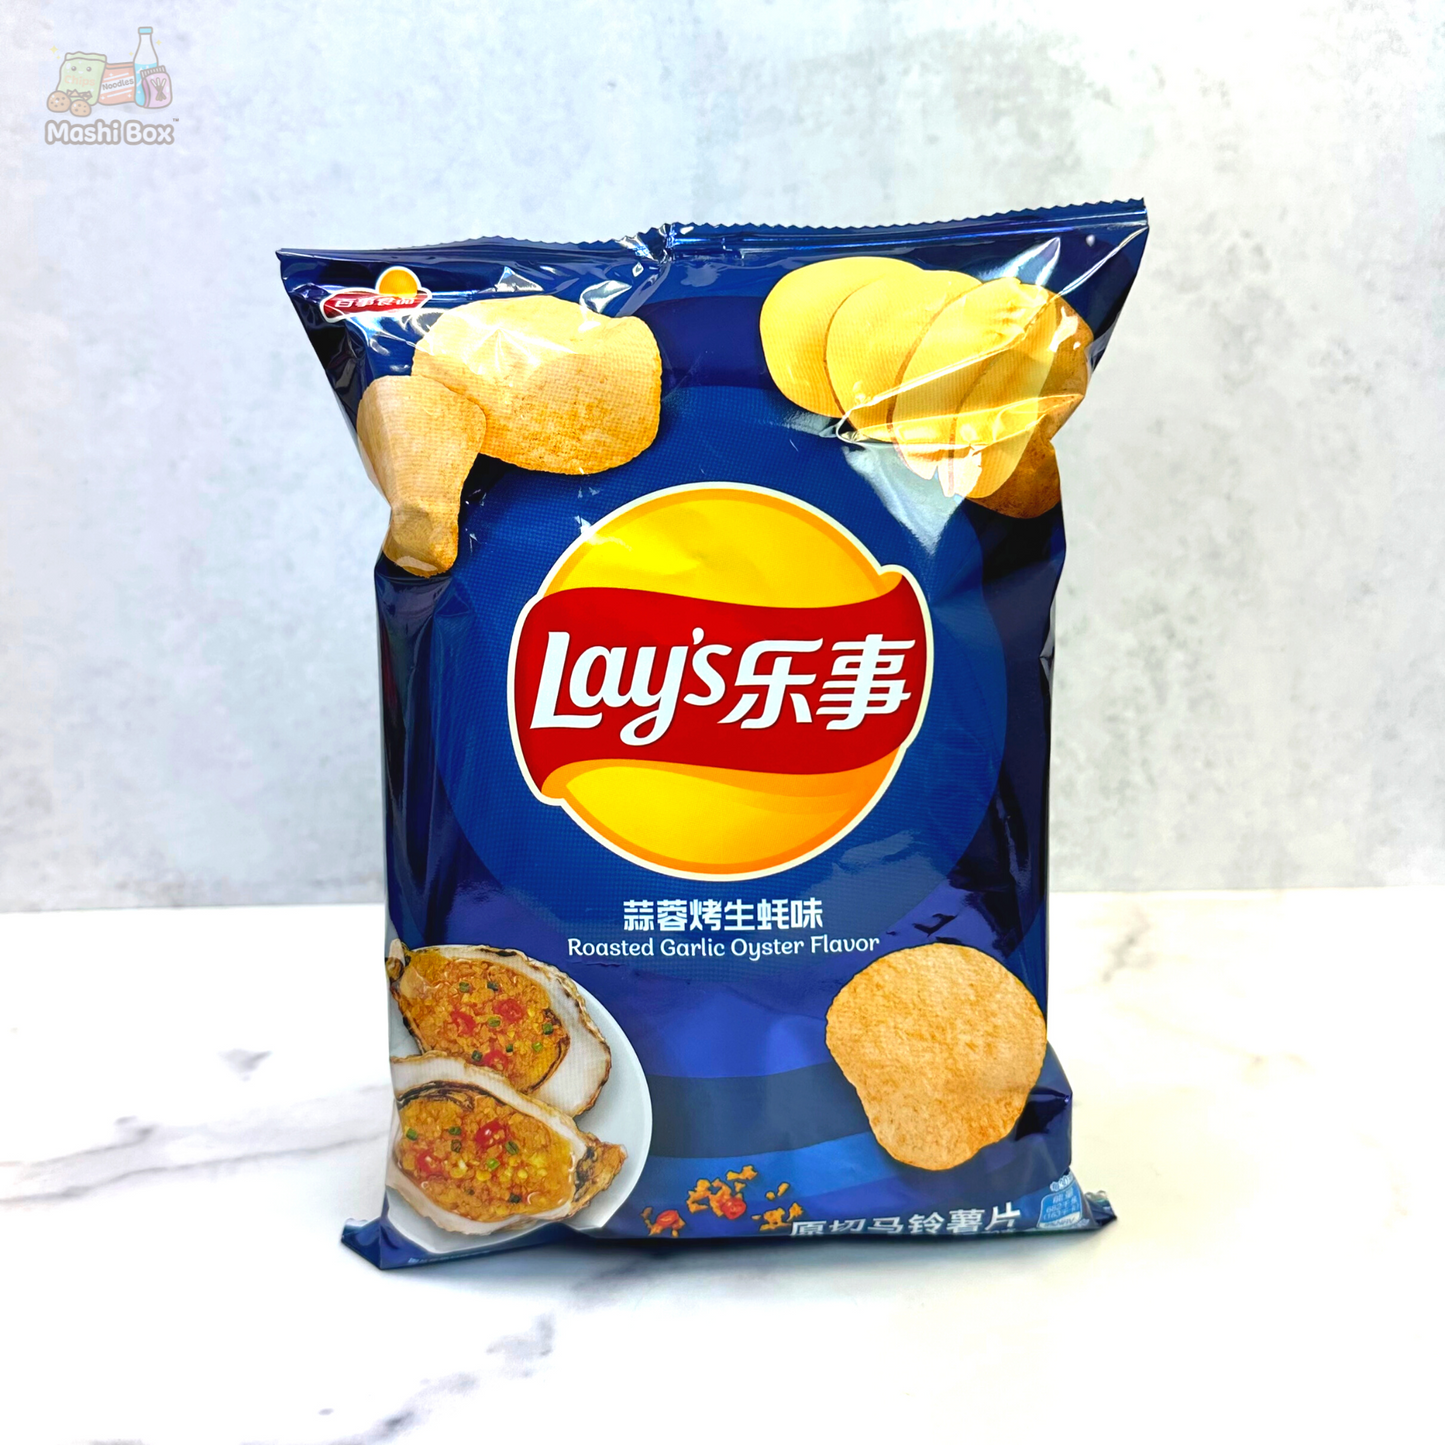 Lay's Roasted Garlic Oyster Flavor Chips